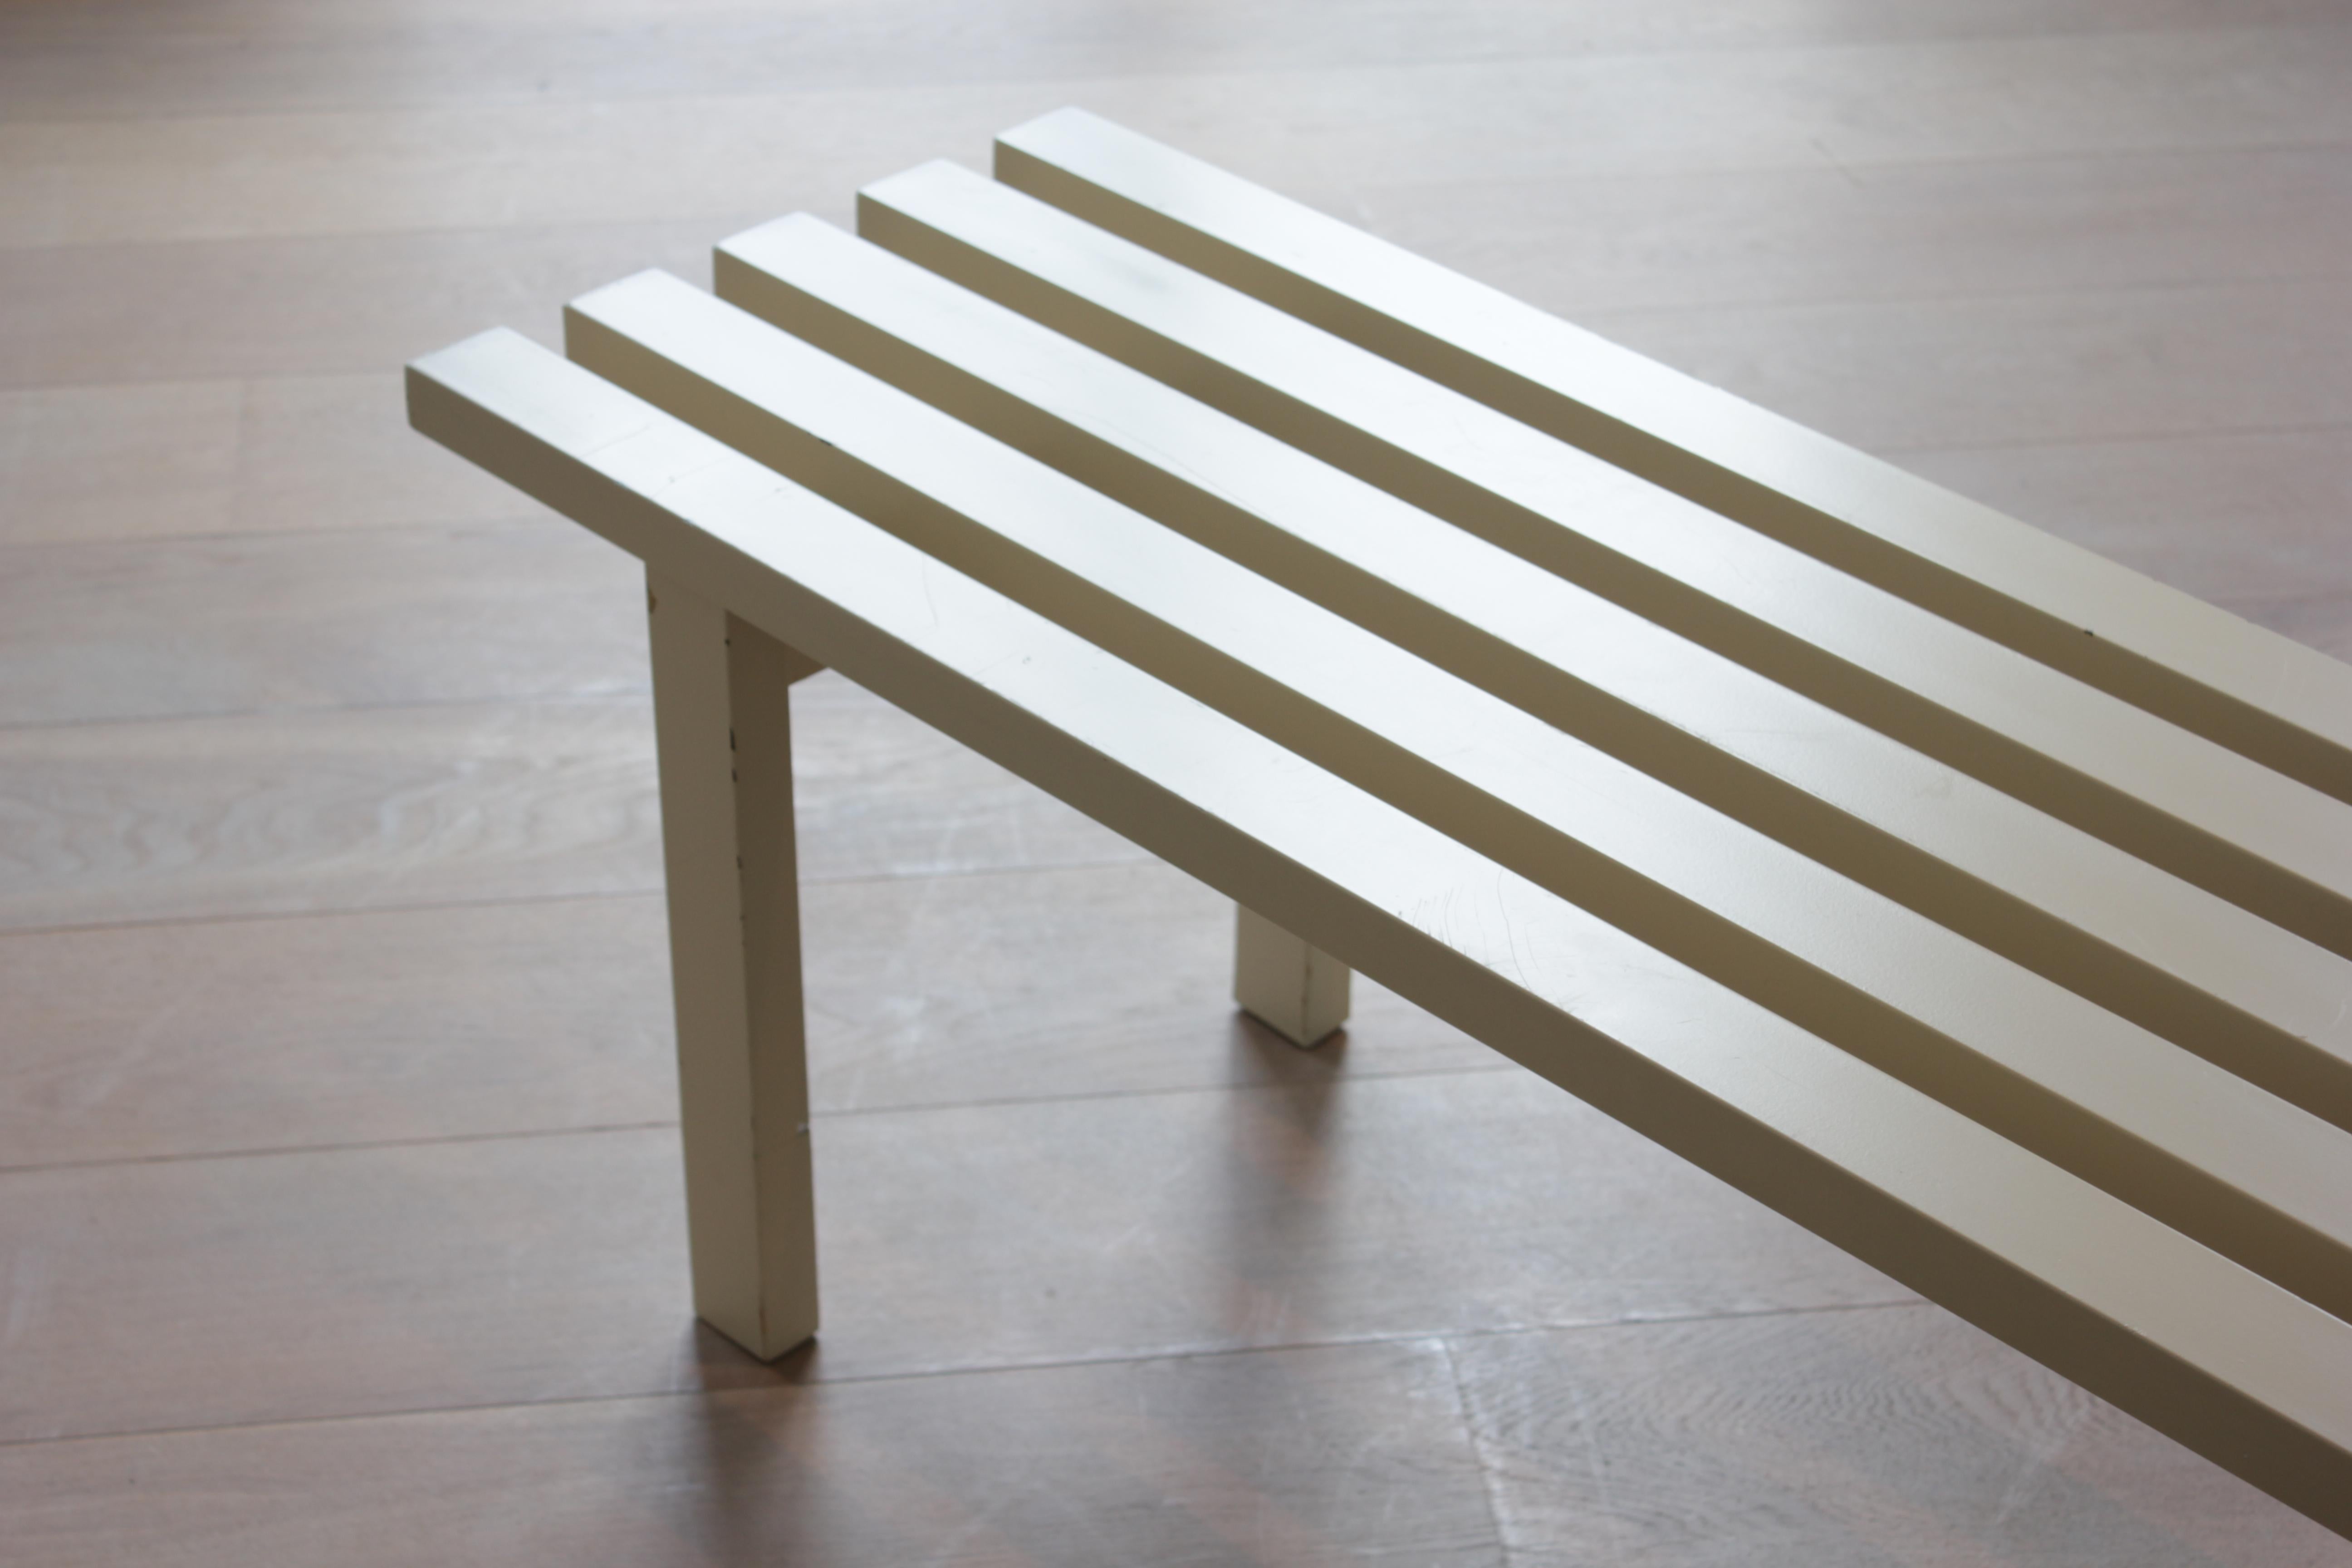 Mid 20th Century Modern Bench attributed to Martin Visser for 't Spectrum, 1960s For Sale 1